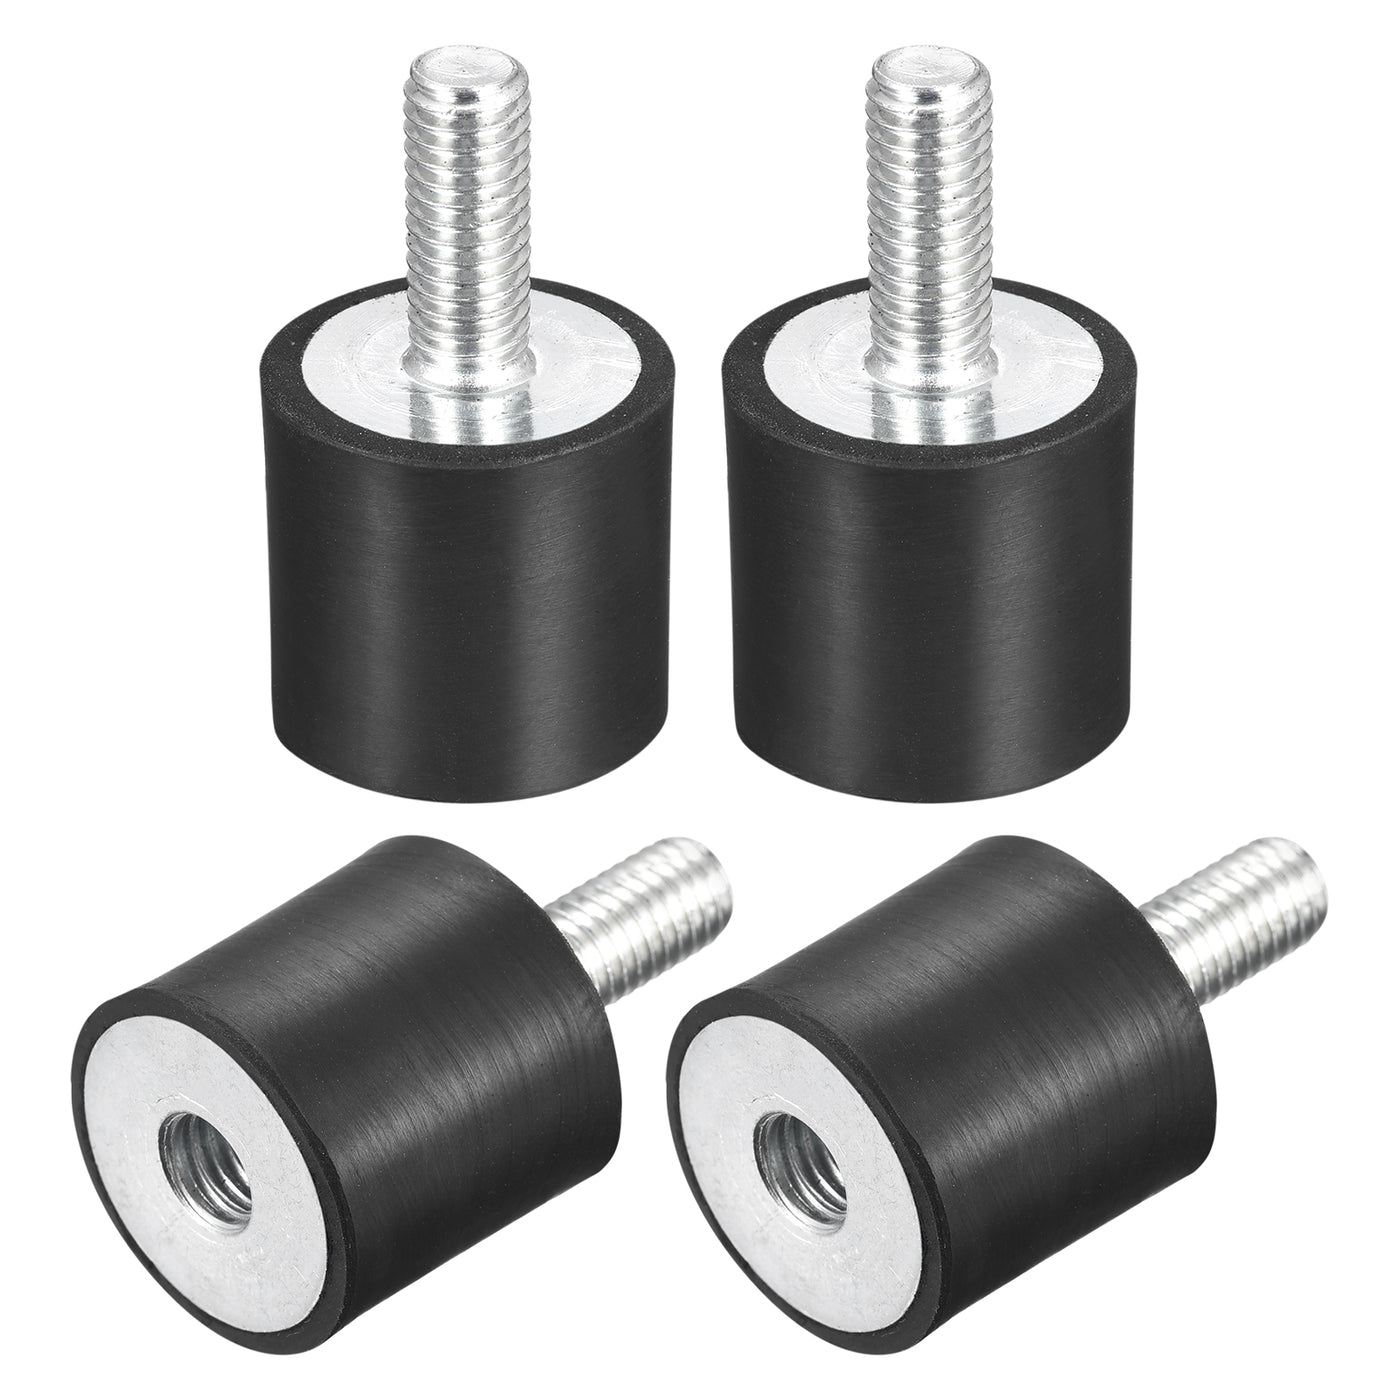 uxcell Uxcell Rubber Mounts 4pcs M8 Male/Female Vibration Isolator Shock Absorber D25mmxH25mm